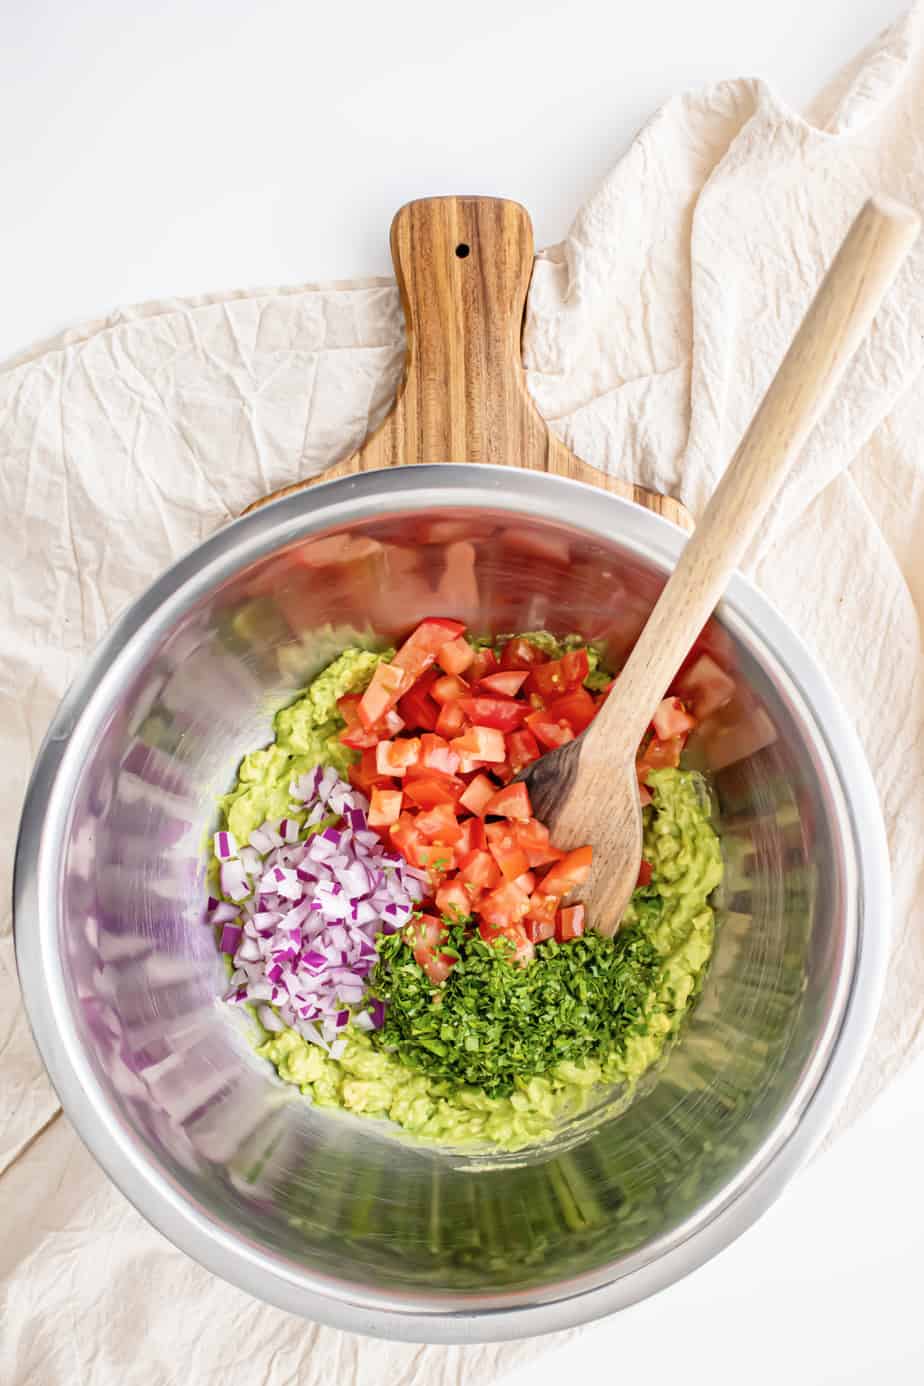 Mixing diced tomatoes, cilantro and purple onion into a large bowl of mashed avocado to make guacamole.